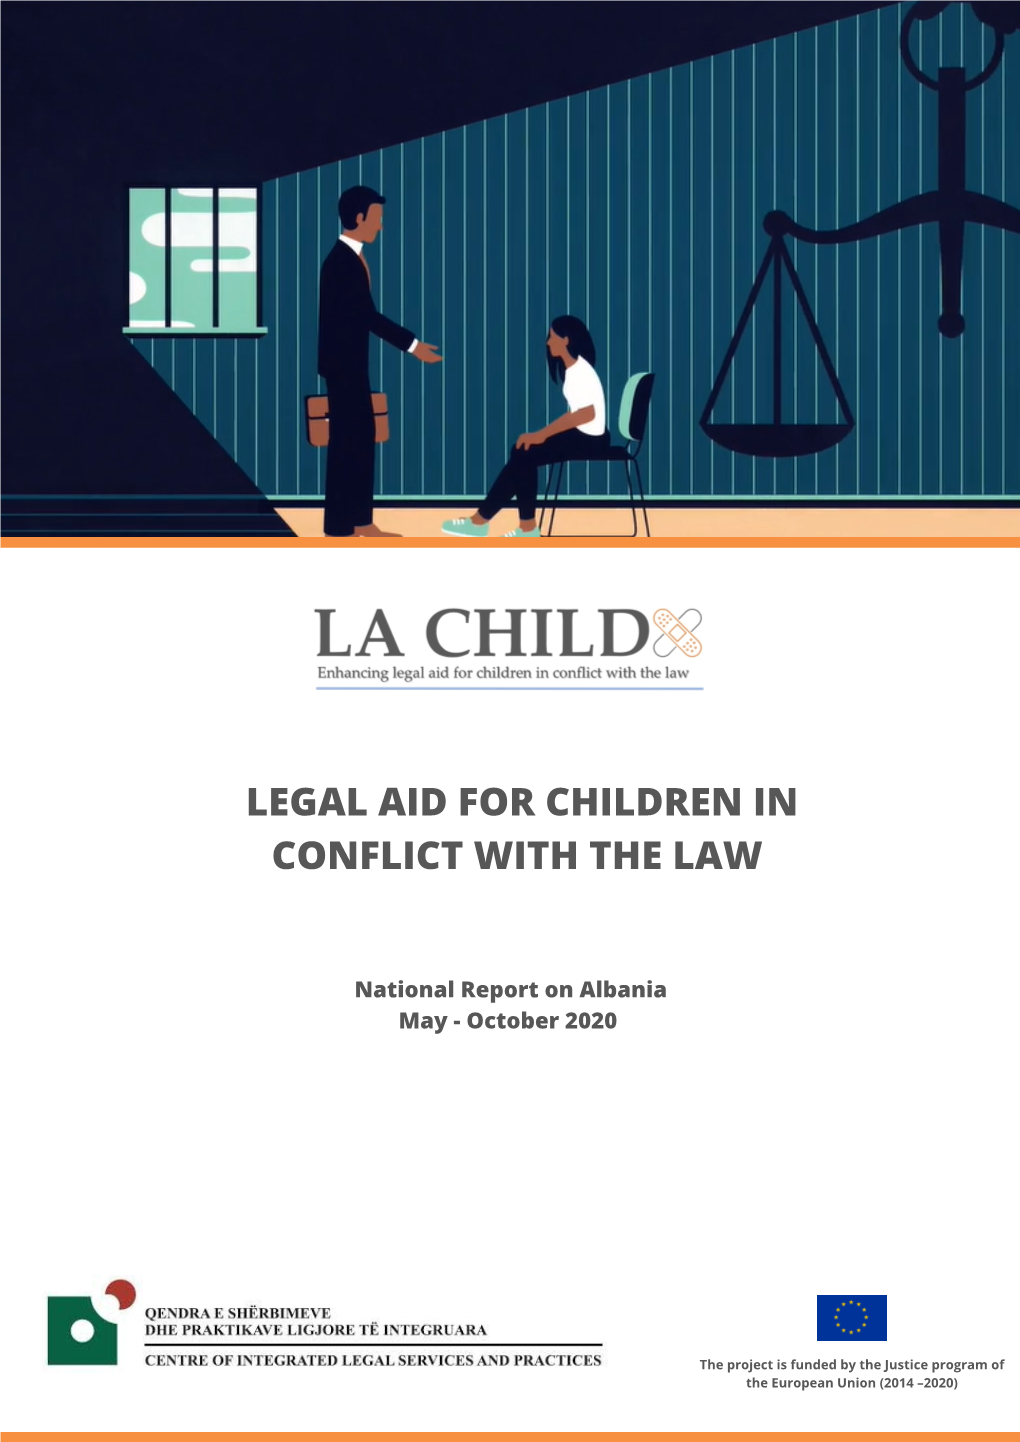 Legal Aid for Children in Conflict with the Law